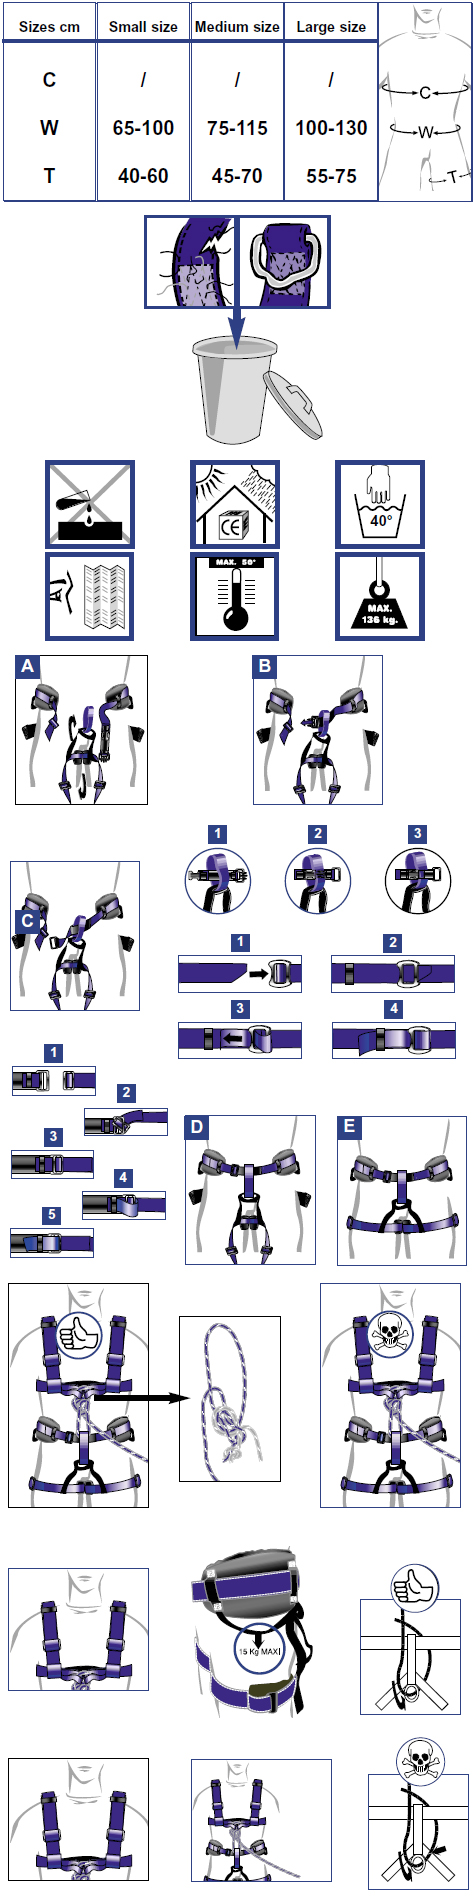 Sit_harness_manual_picture